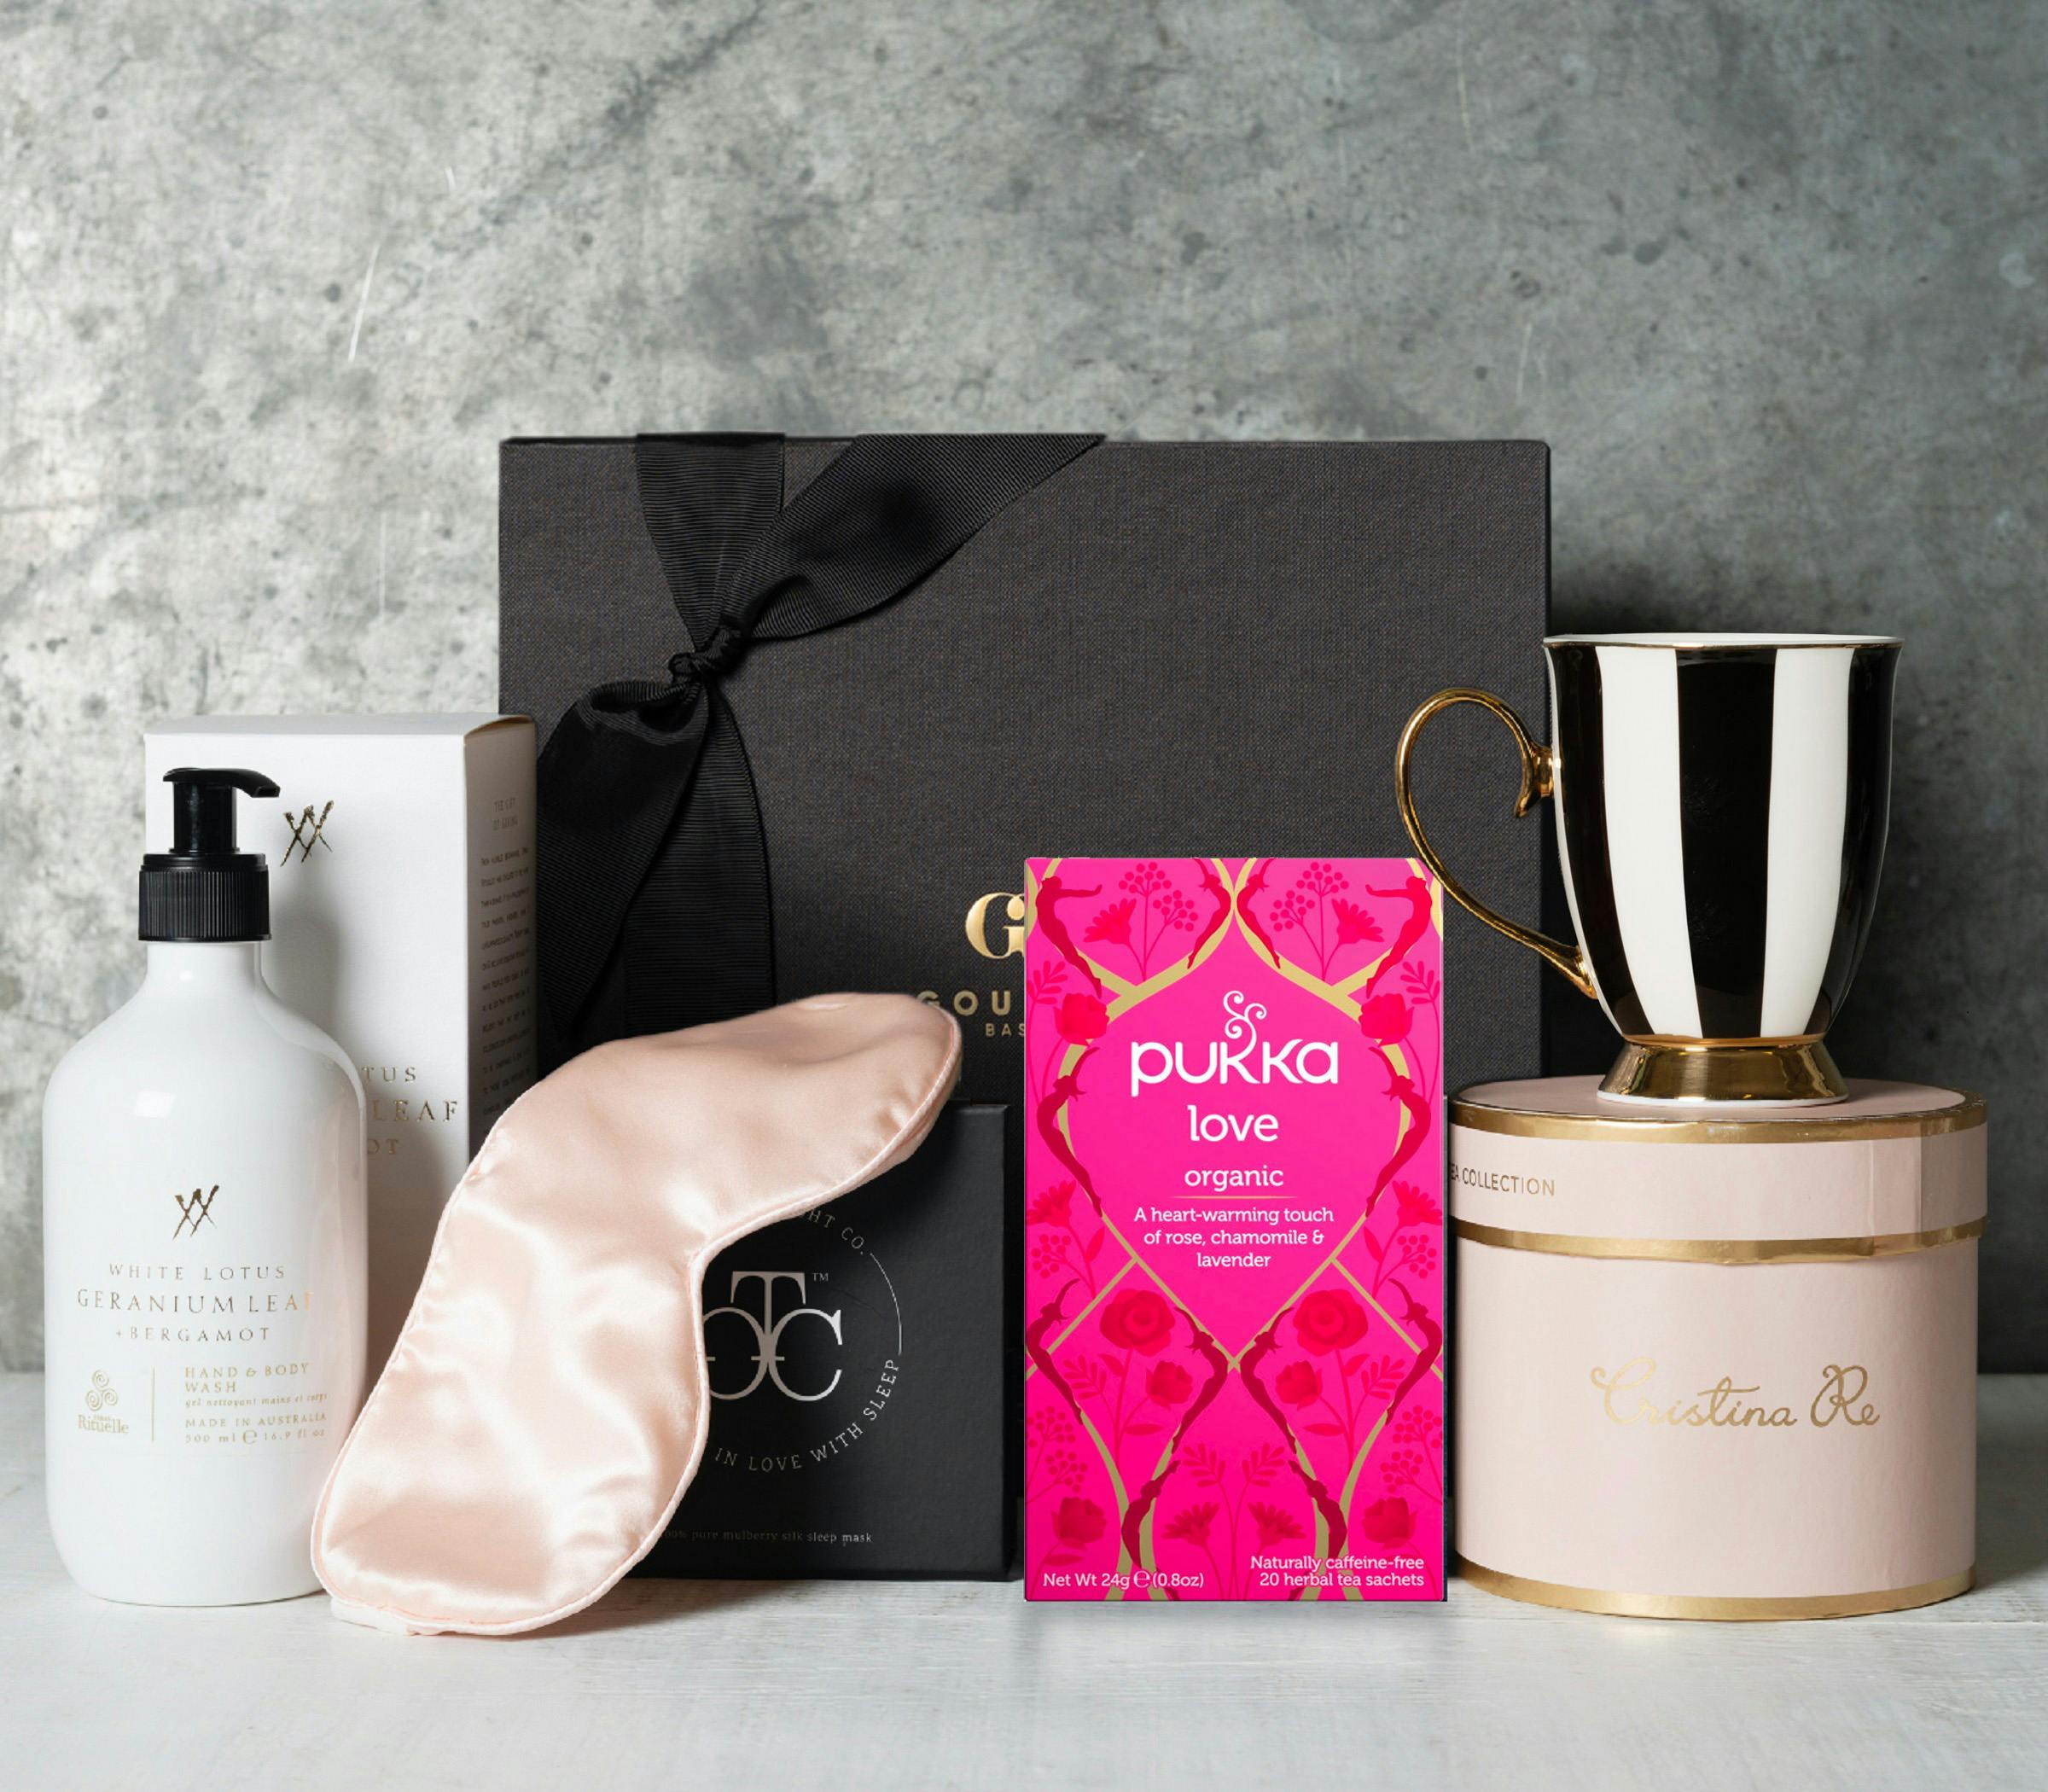 A little luxury hamper etched